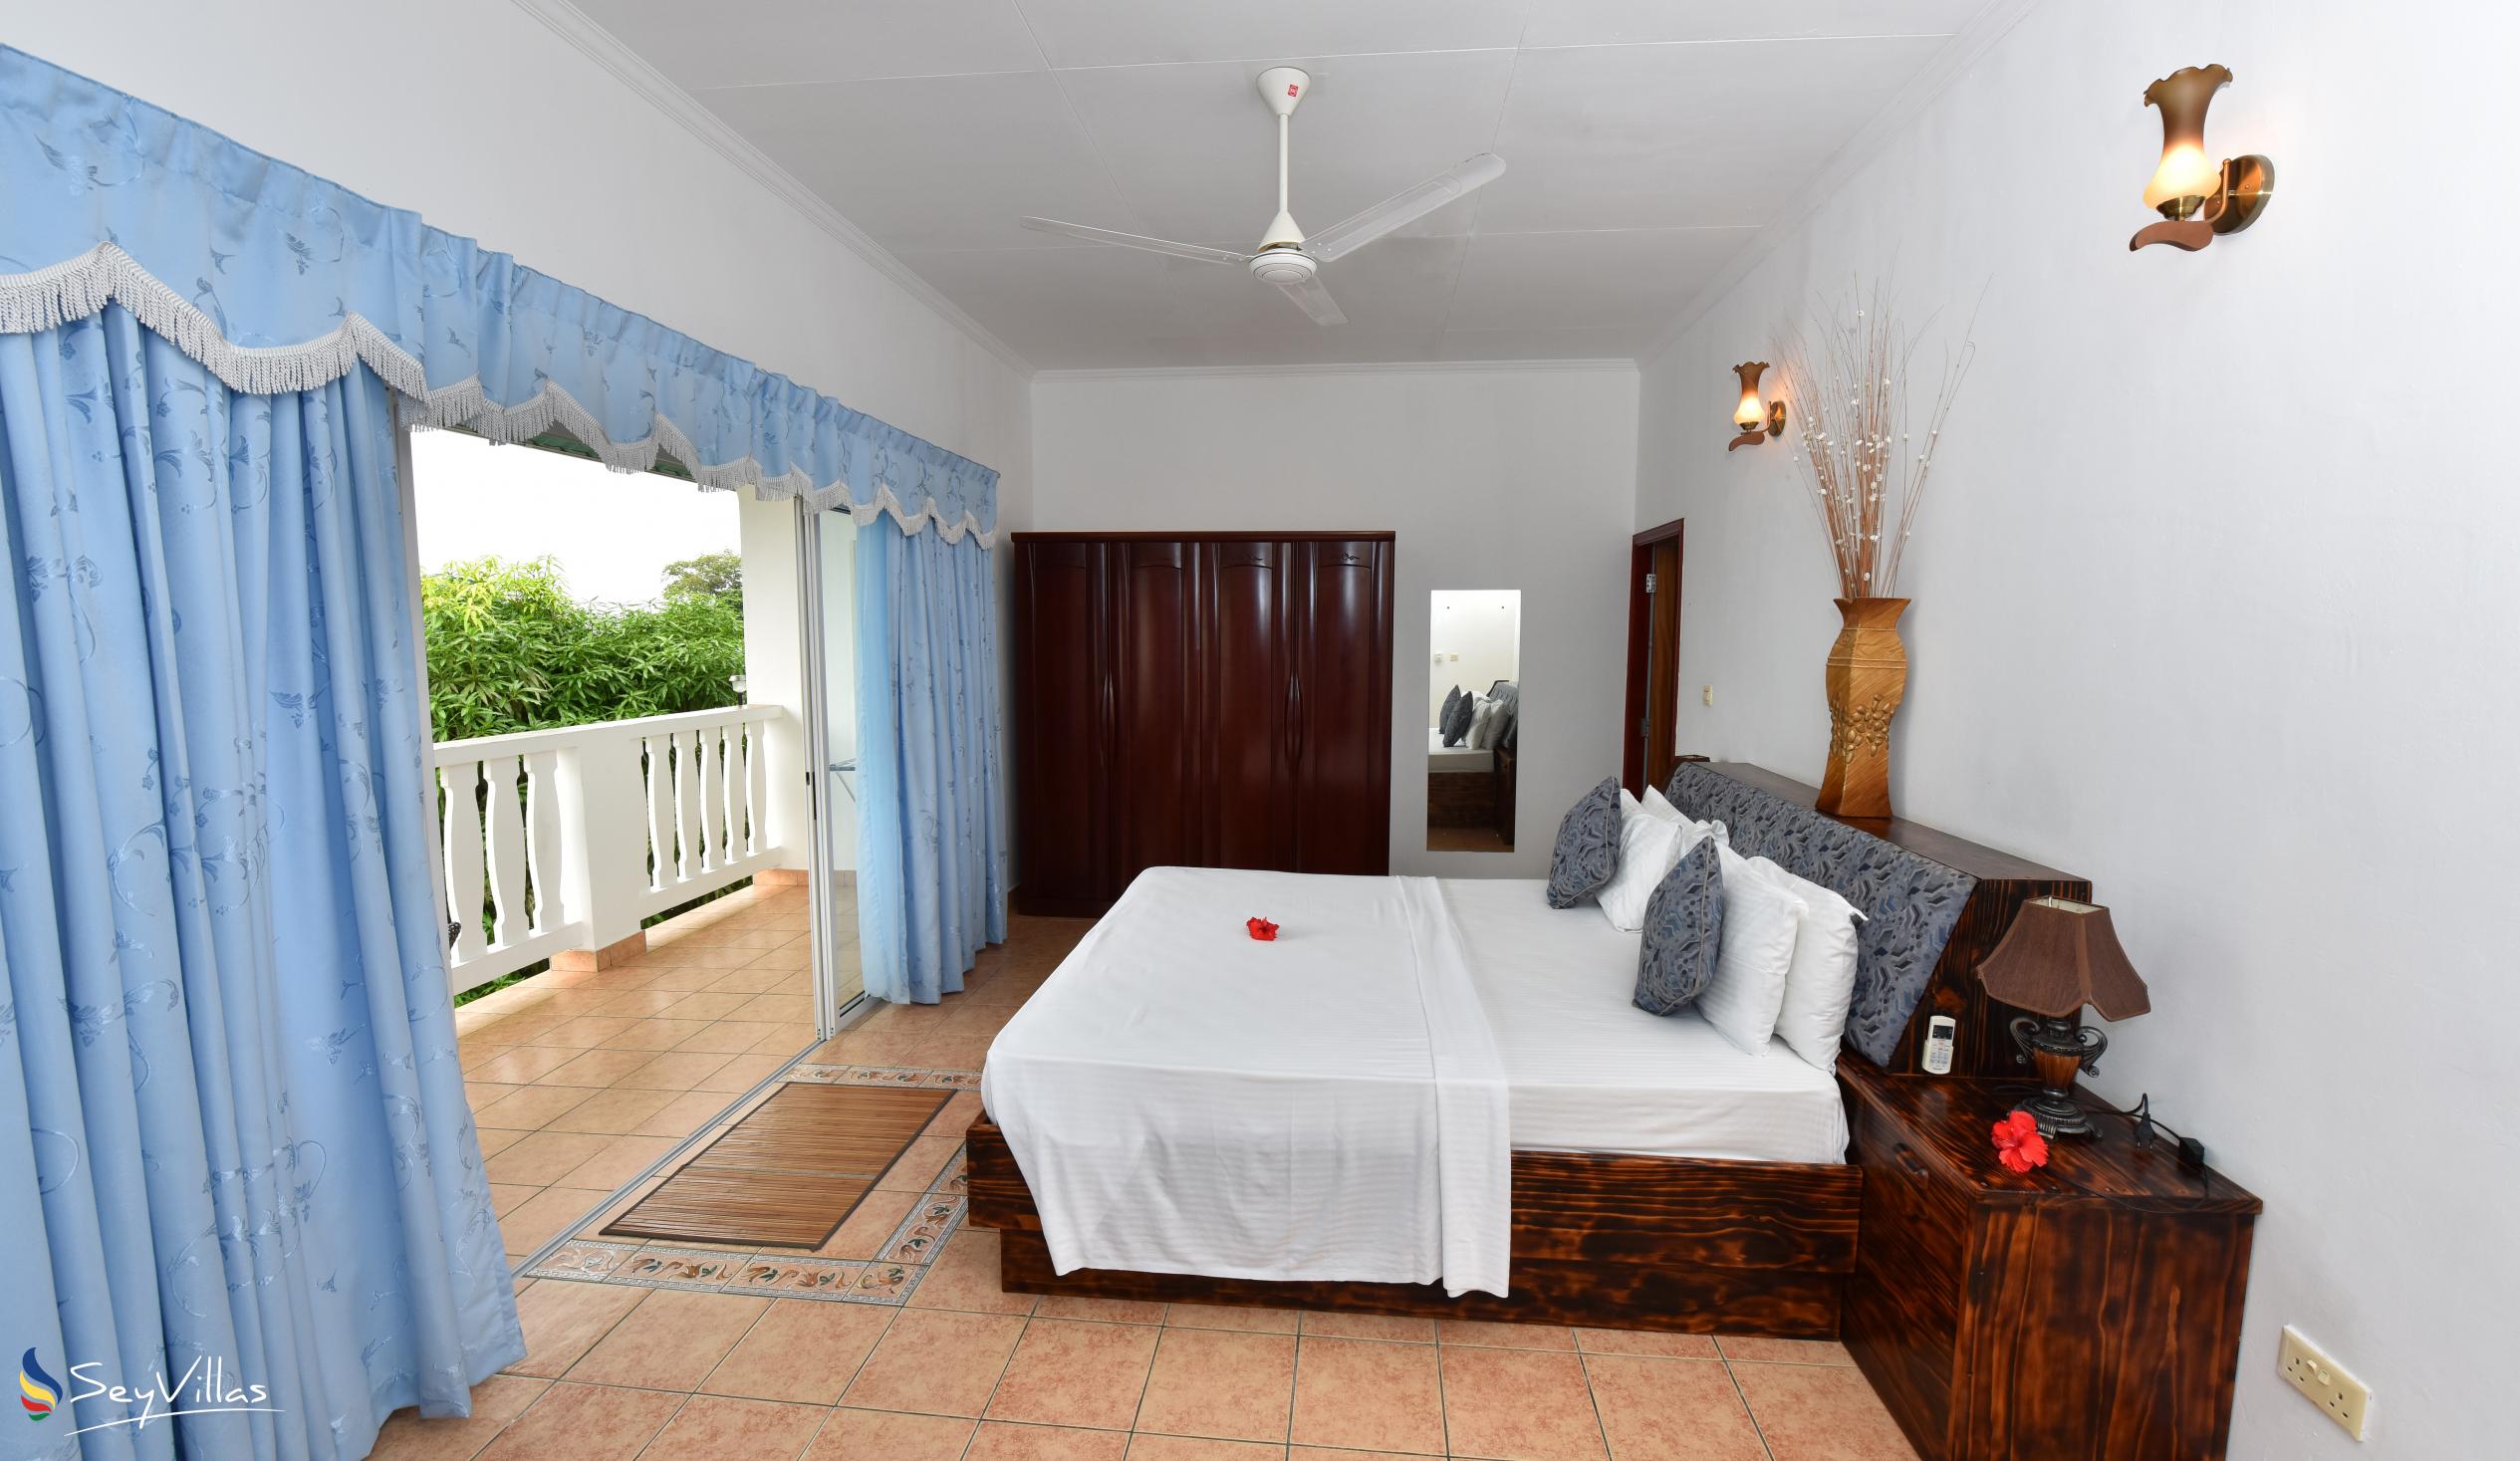 Photo 14: The Diver's Lodge - Standard Room (First Floor) - Mahé (Seychelles)